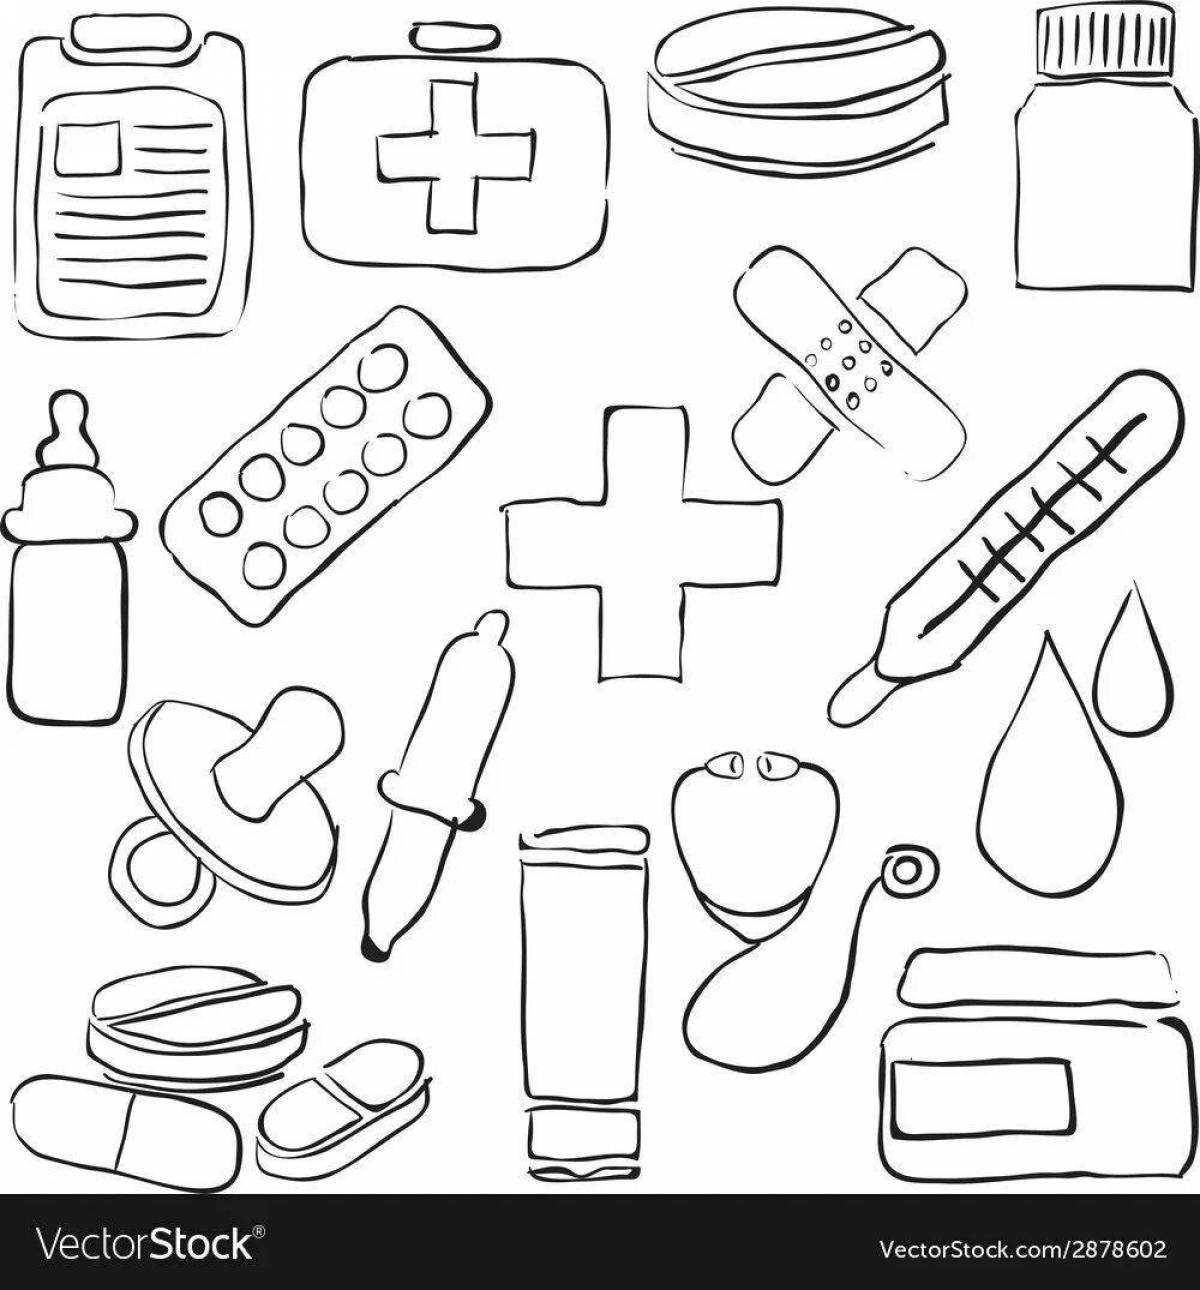 Pharmacist's dazzling coloring book